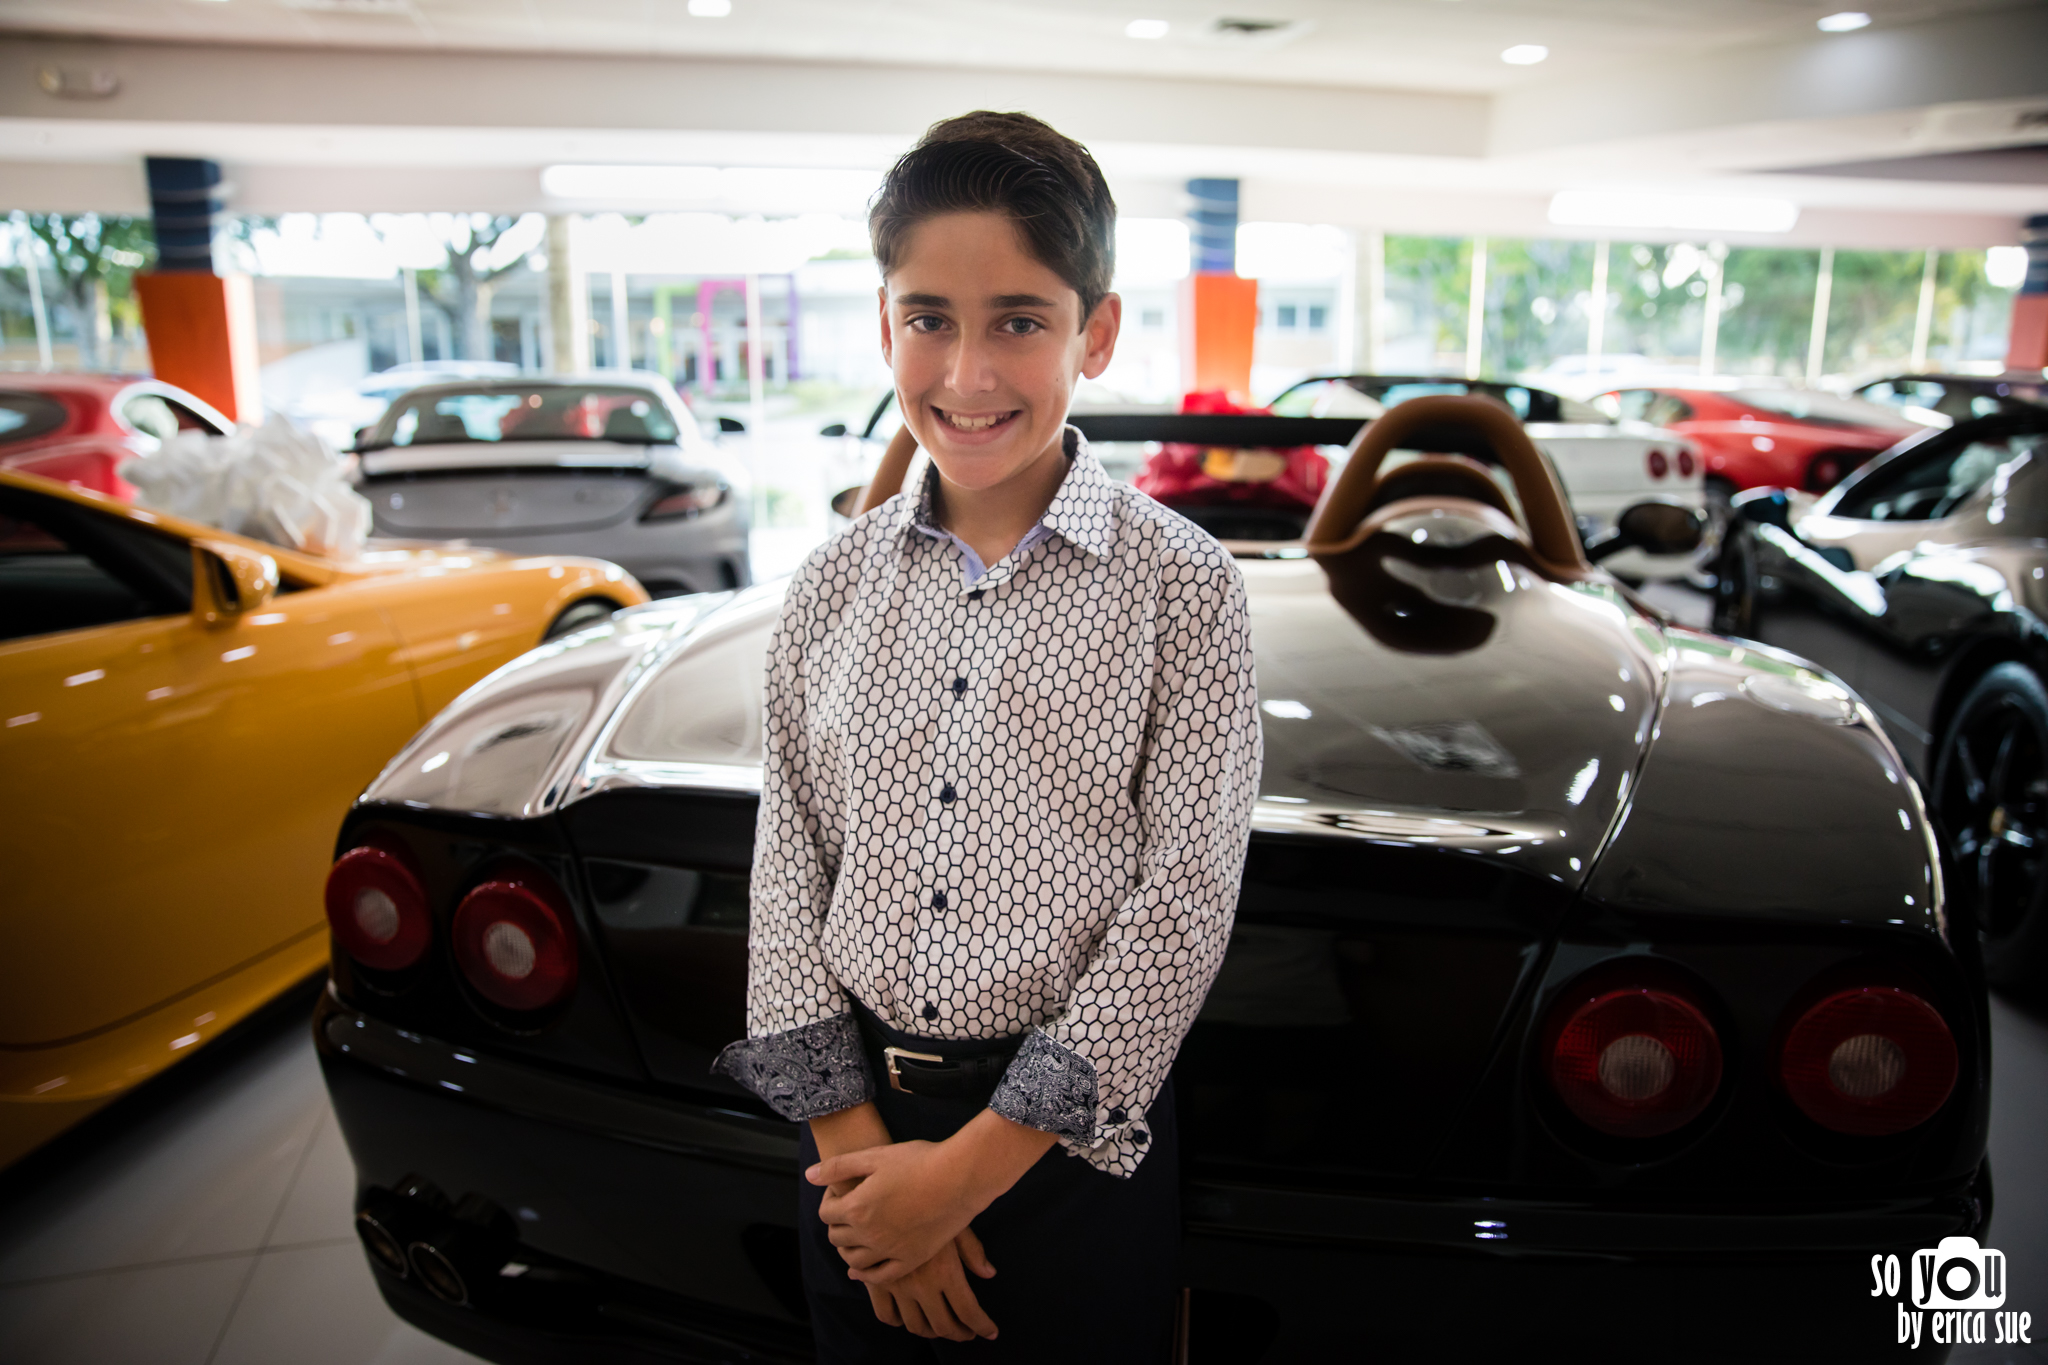 so-you-by-erica-sue-mitzvah-photographer-collection-luxury-car-ft-lauderdale-4991.jpg